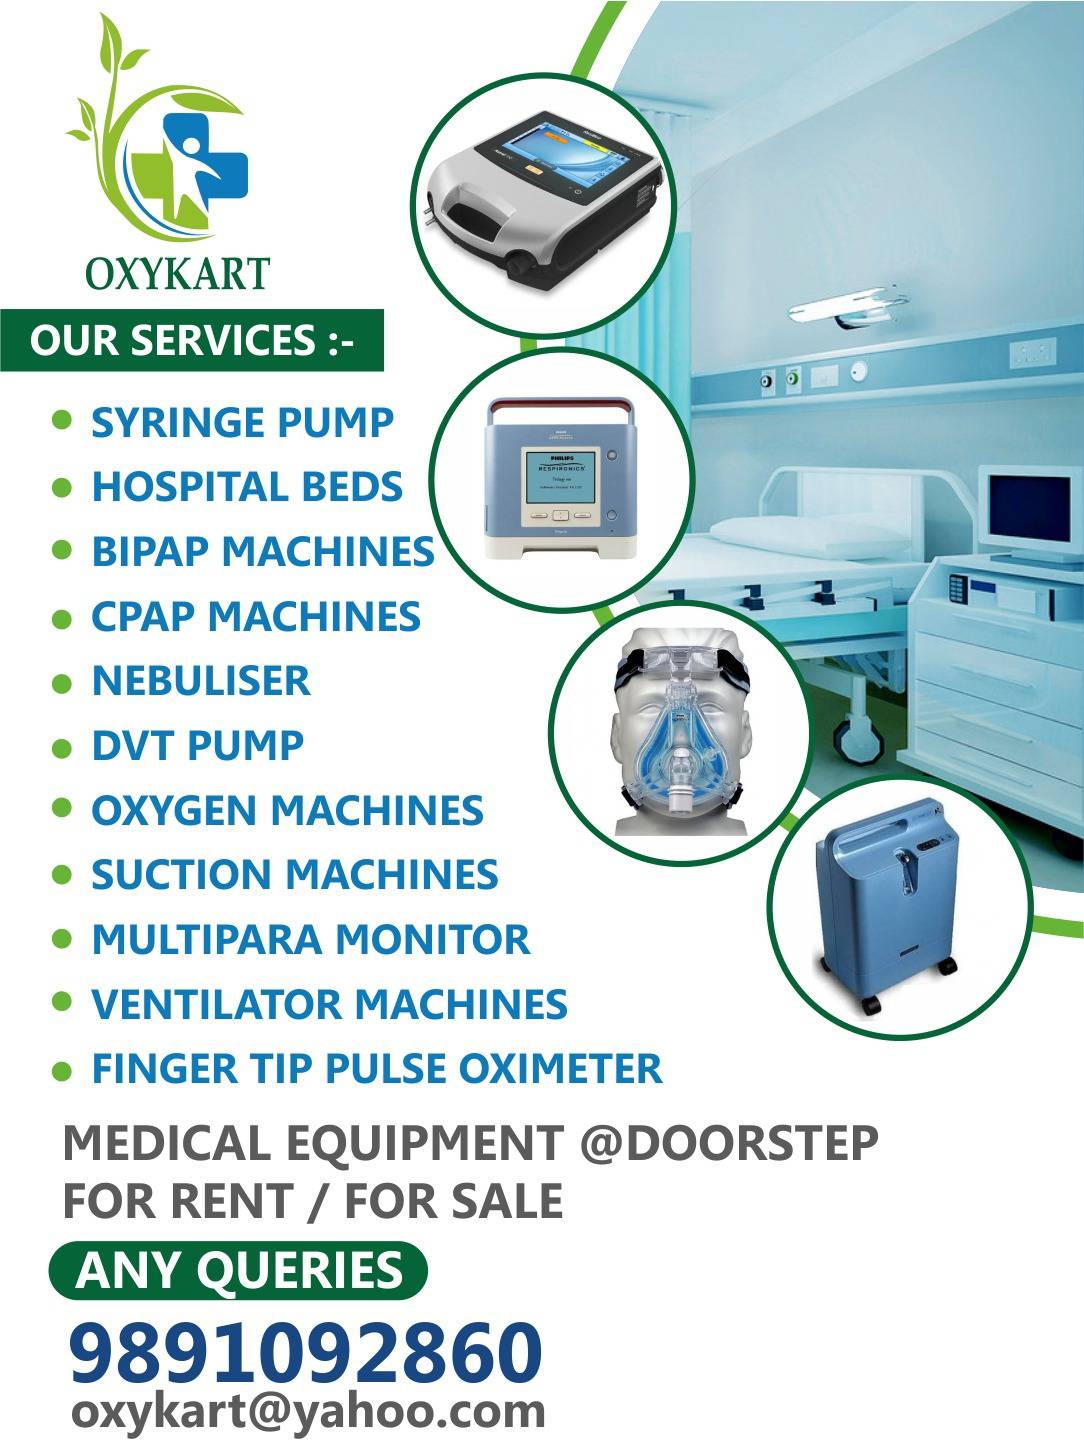 BIPAP AUTO CPAP OXYGEN Concentrator Hire or Buy- OXYKART At Best Prices in DELHI NCRServicesHealth - FitnessWest DelhiRohini